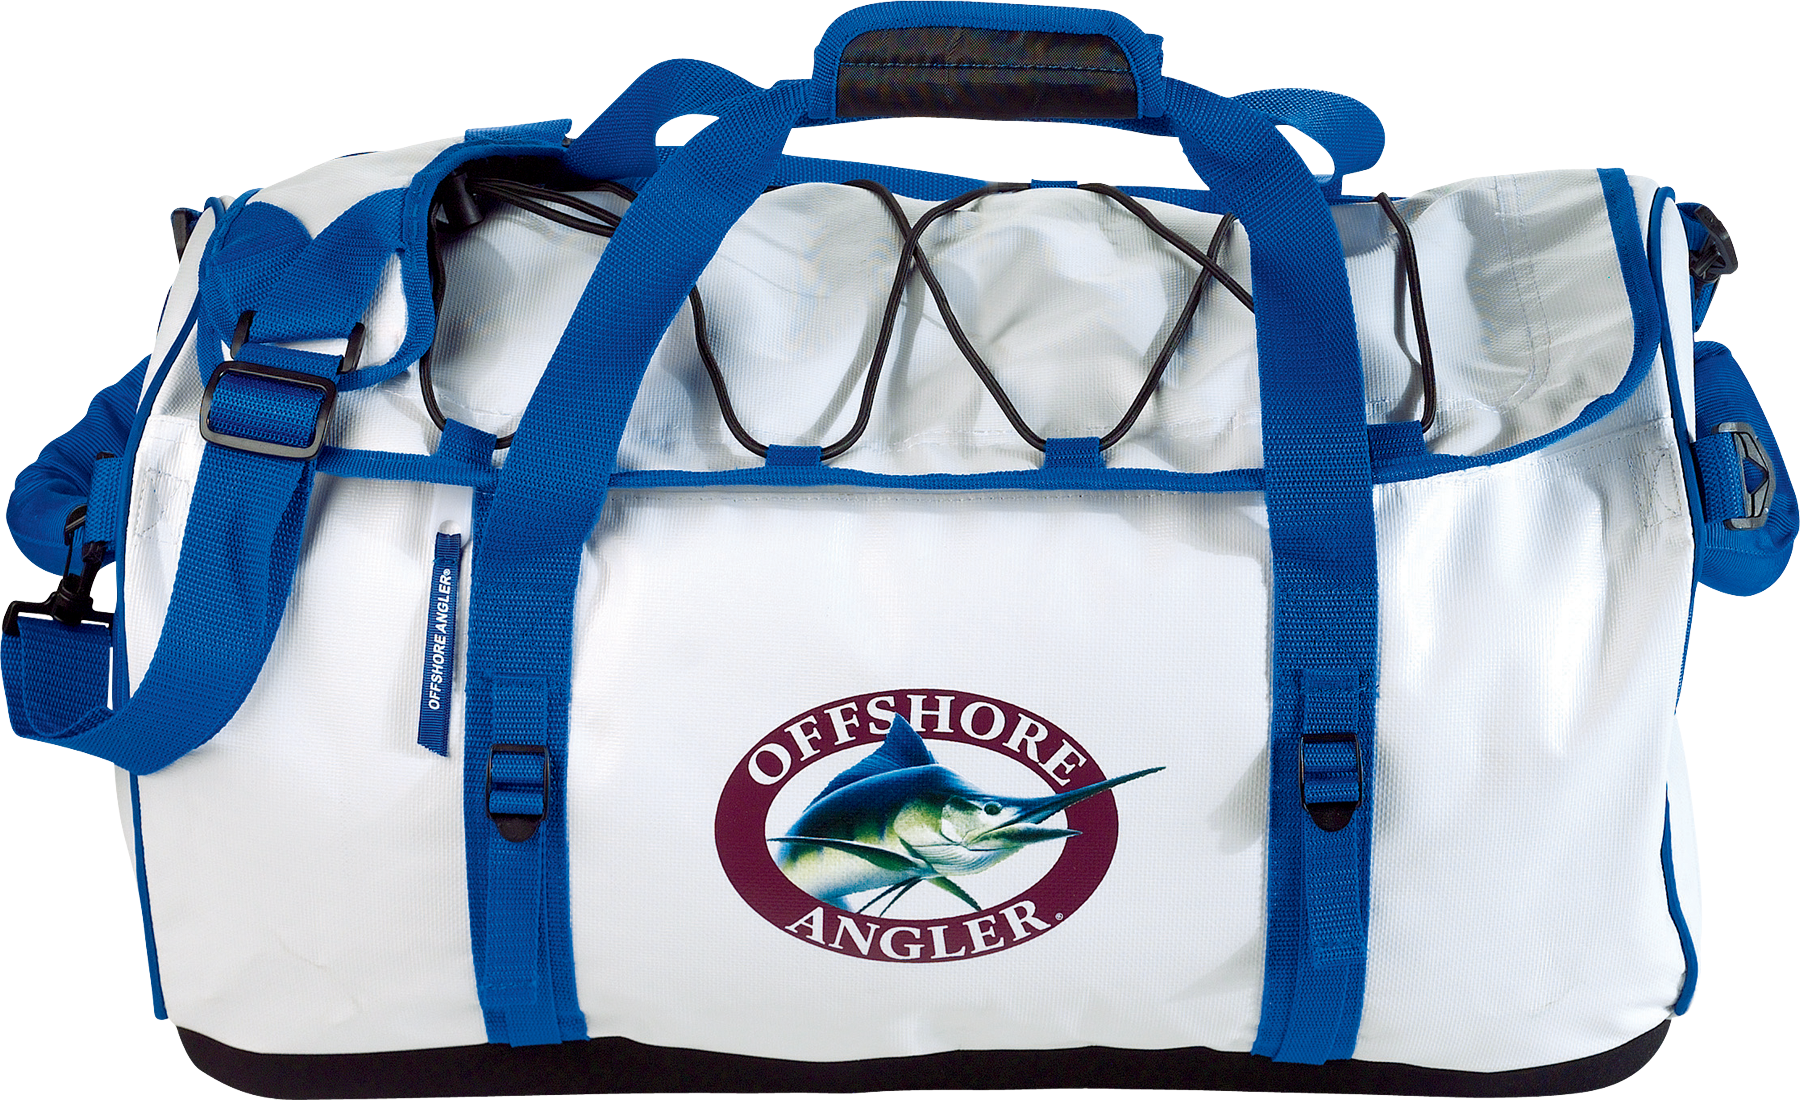 Southern California - offshore tackle box/bag